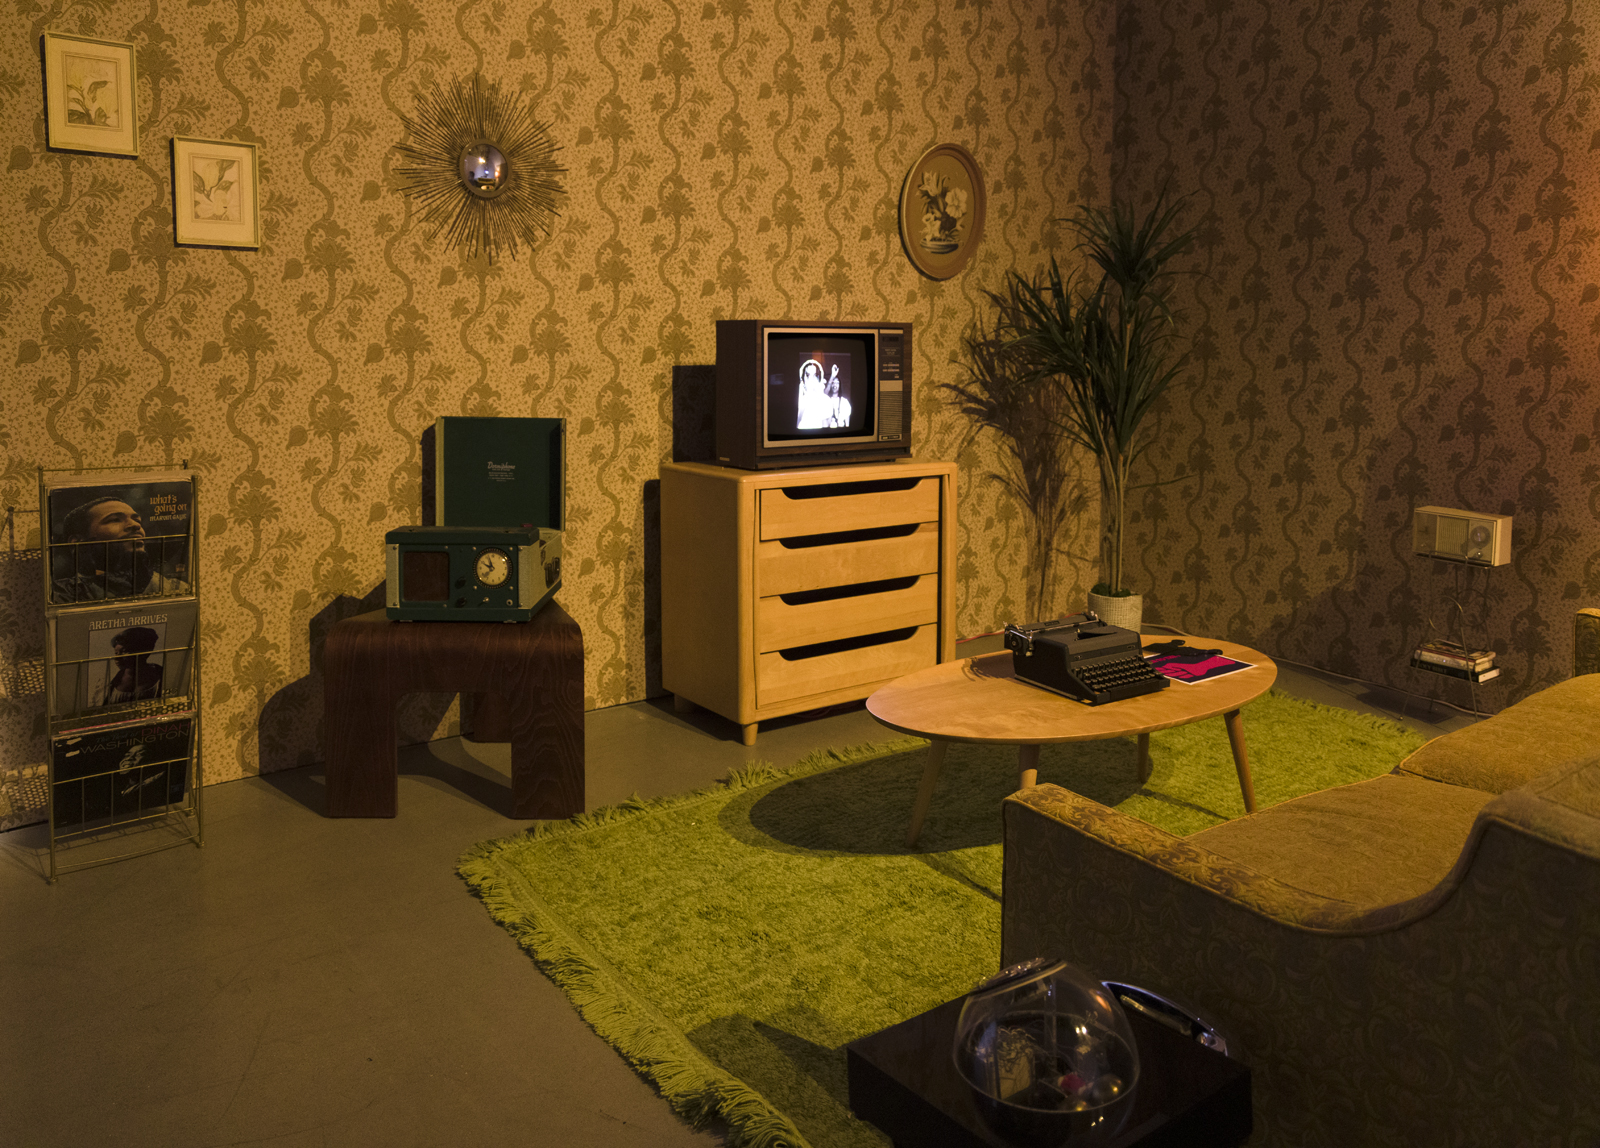 installation view of blitz bazawule's a moment in time at uta artist space, with dark, yellow-toned room with retro TV, couch, wallpaper and magazine rack